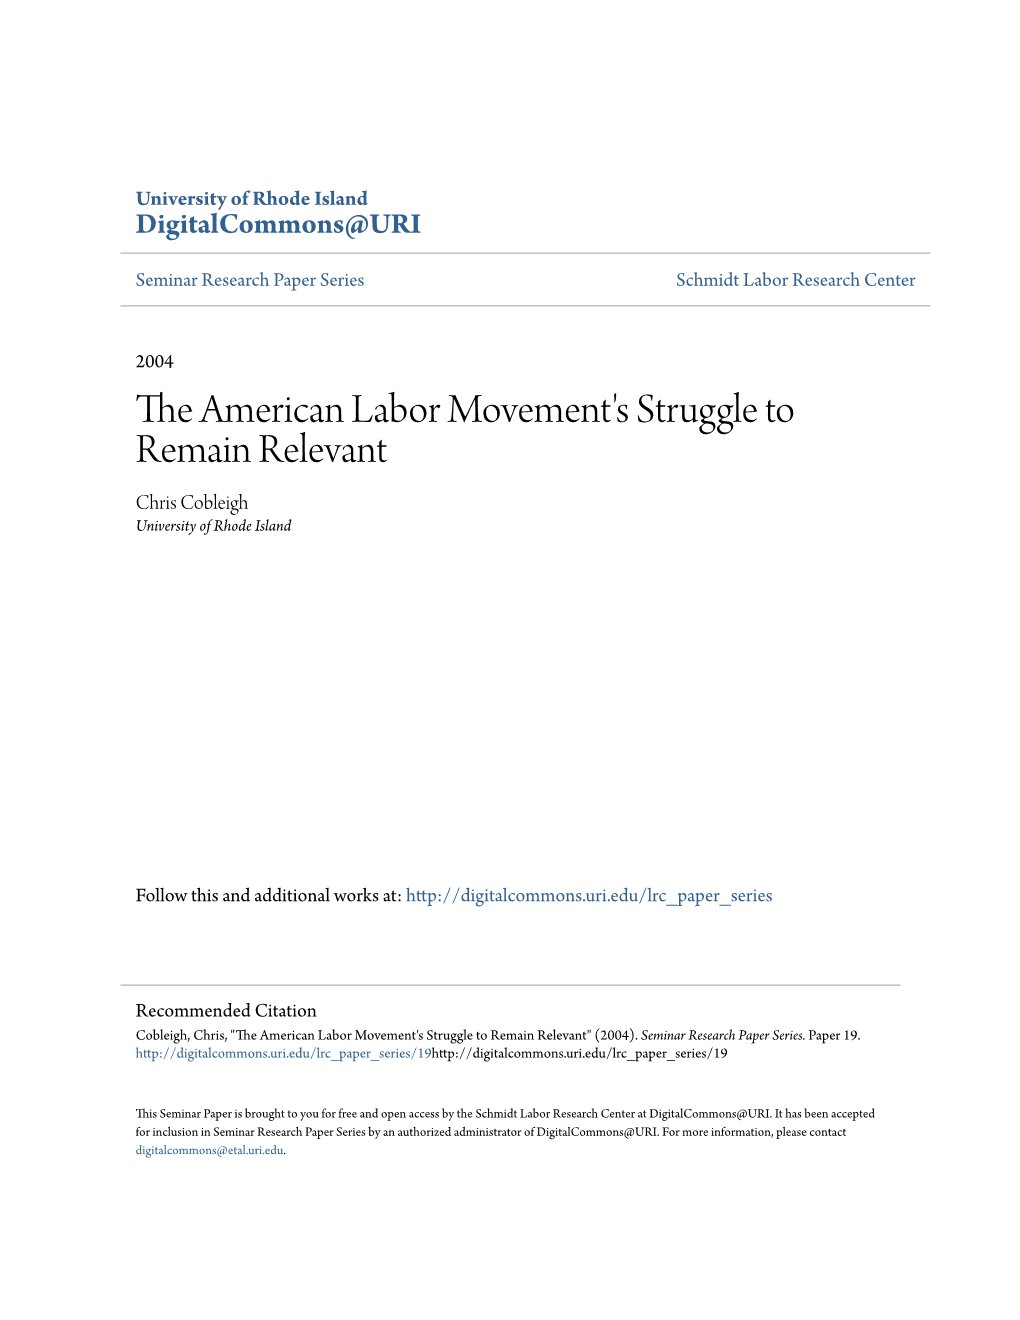 The American Labor Movement's Struggle to Remain Relevant Chris Cobleigh University of Rhode Island